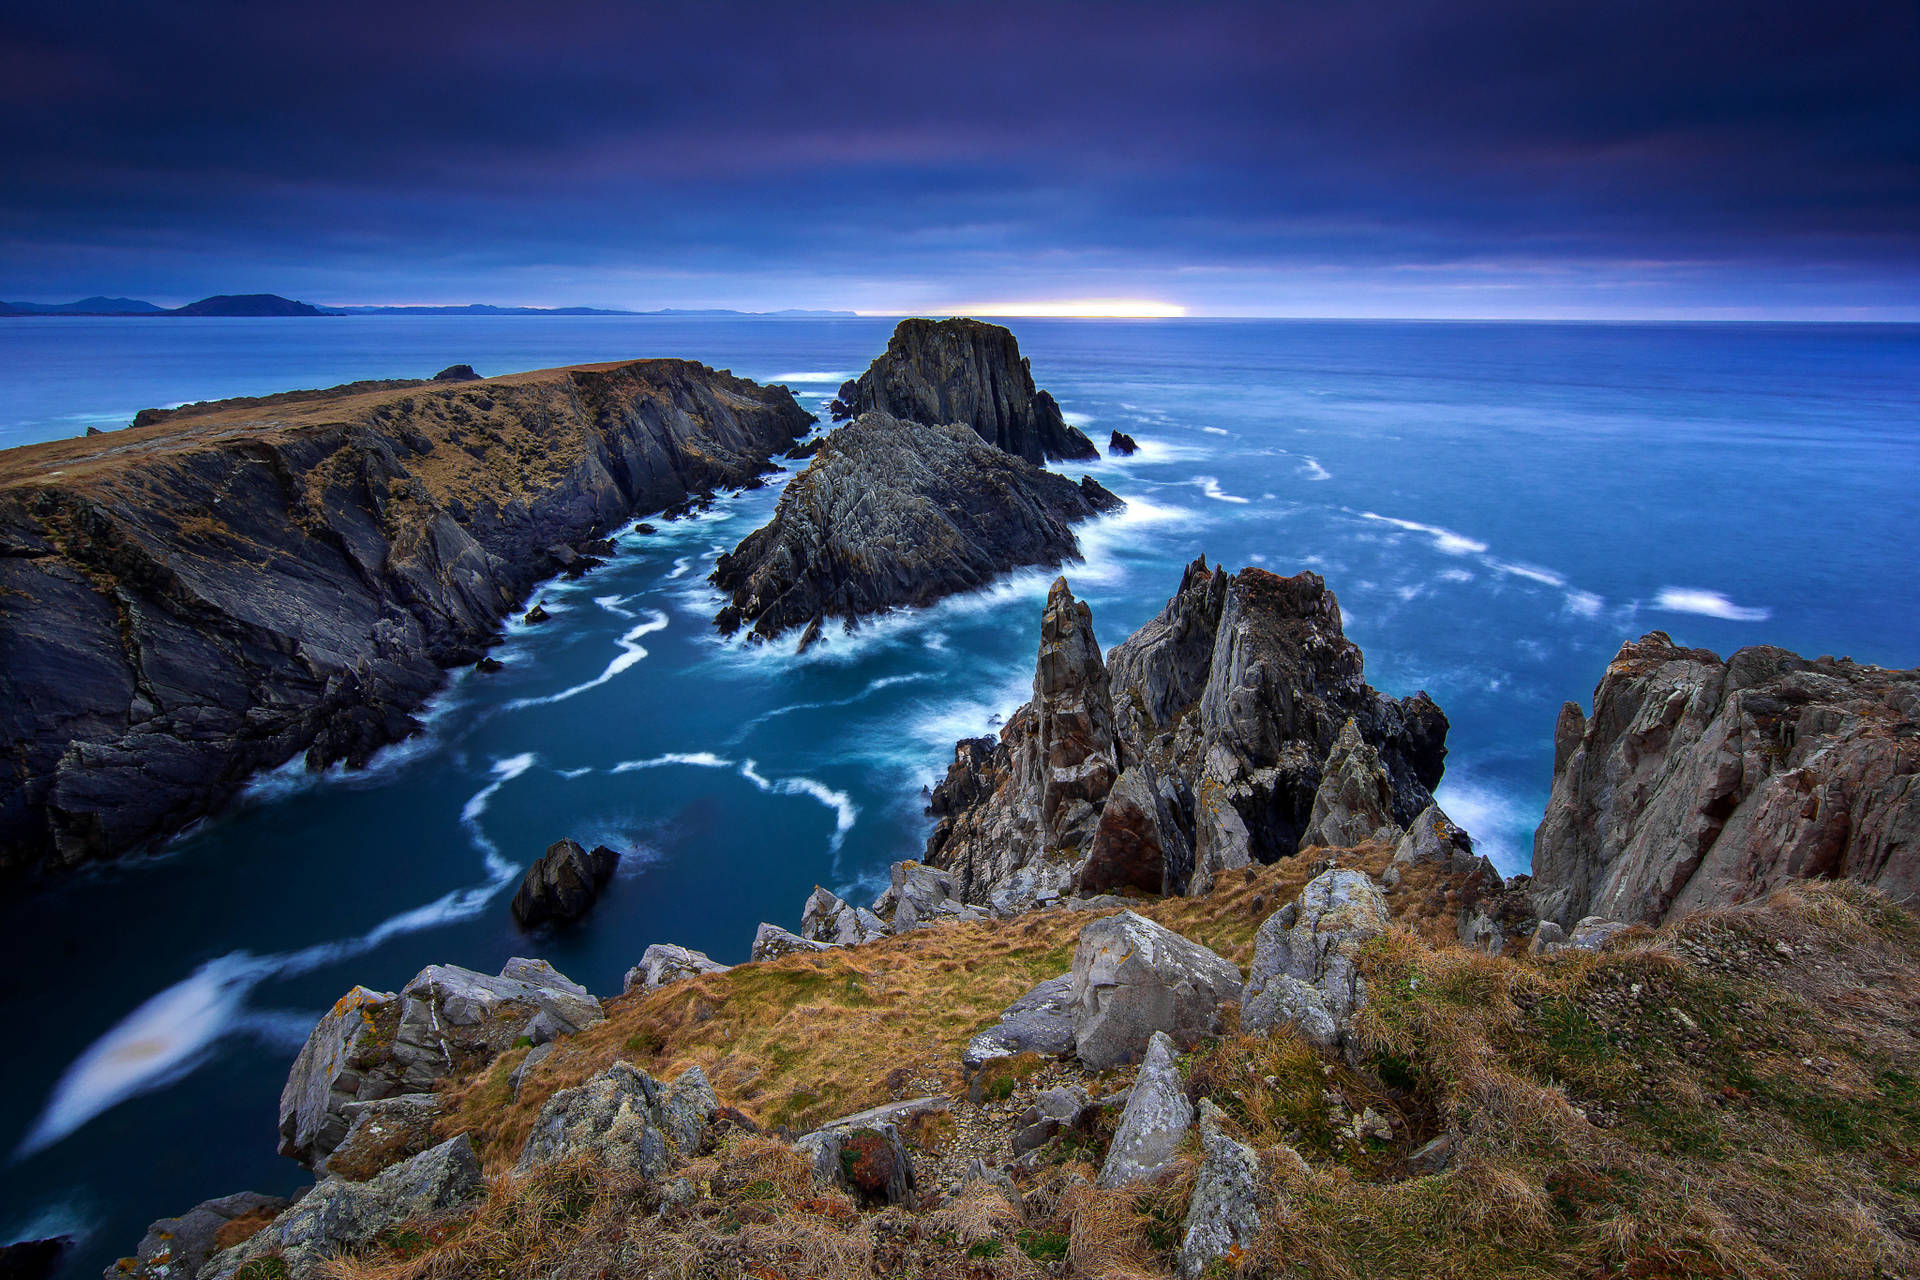 A Magnificent Ocean View in Donegal, Ireland Wallpaper